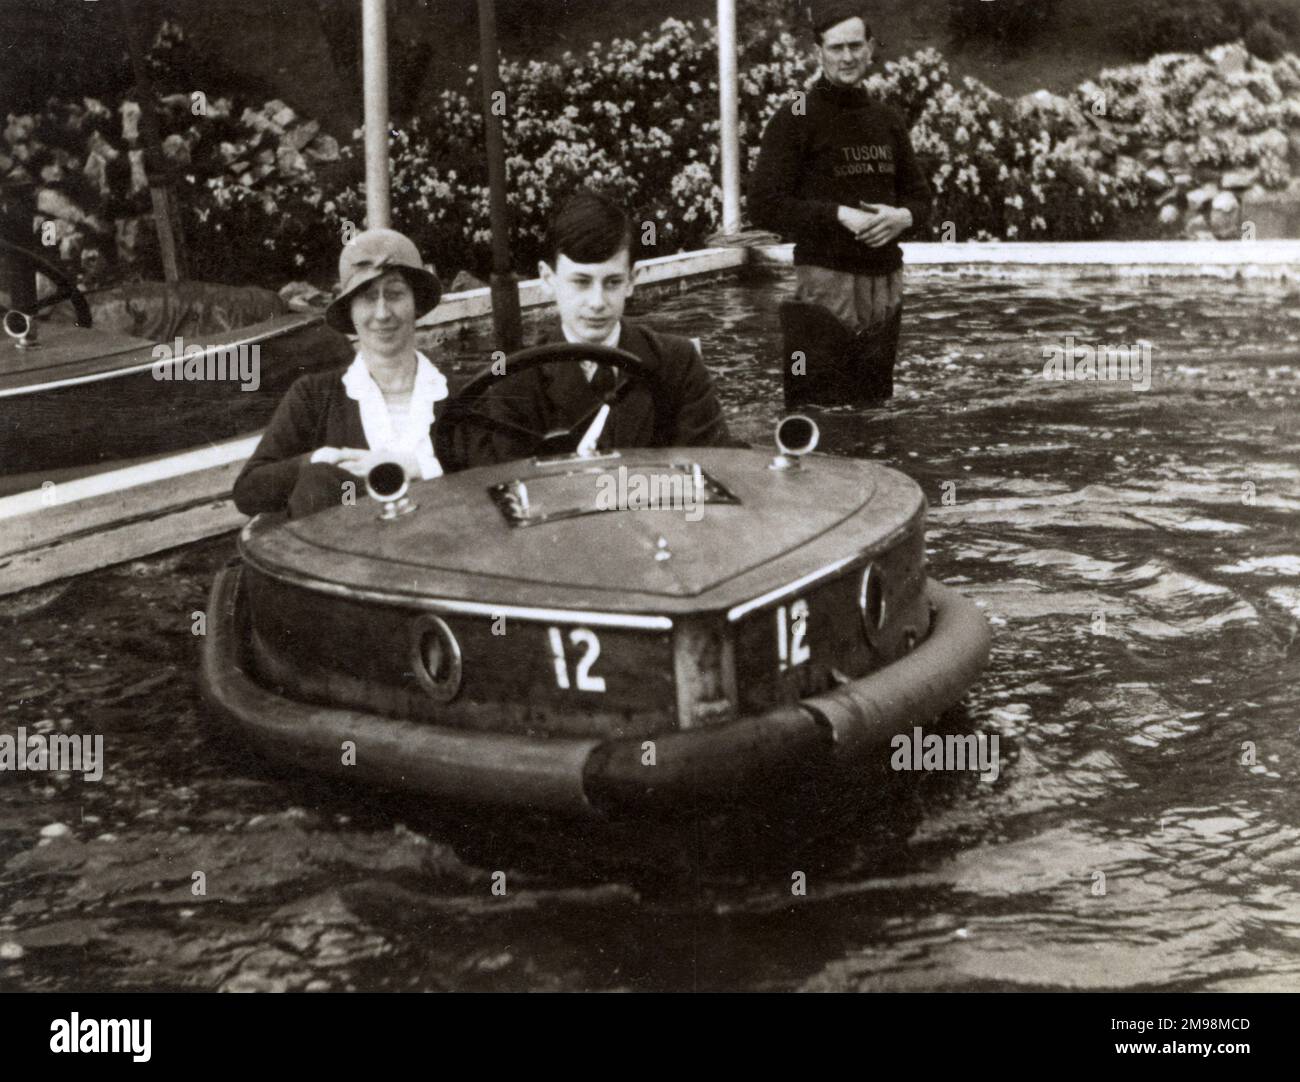 Mother and son riding a Rytecraft Scoota-boat - a wooden plywood motor boat at the Fairground - Tuson's Scoota Boats - Llandudno, Wales. These boats are the electric type with 110 volt motor, powered from a mesh up above, earthing out through the water. Stock Photo